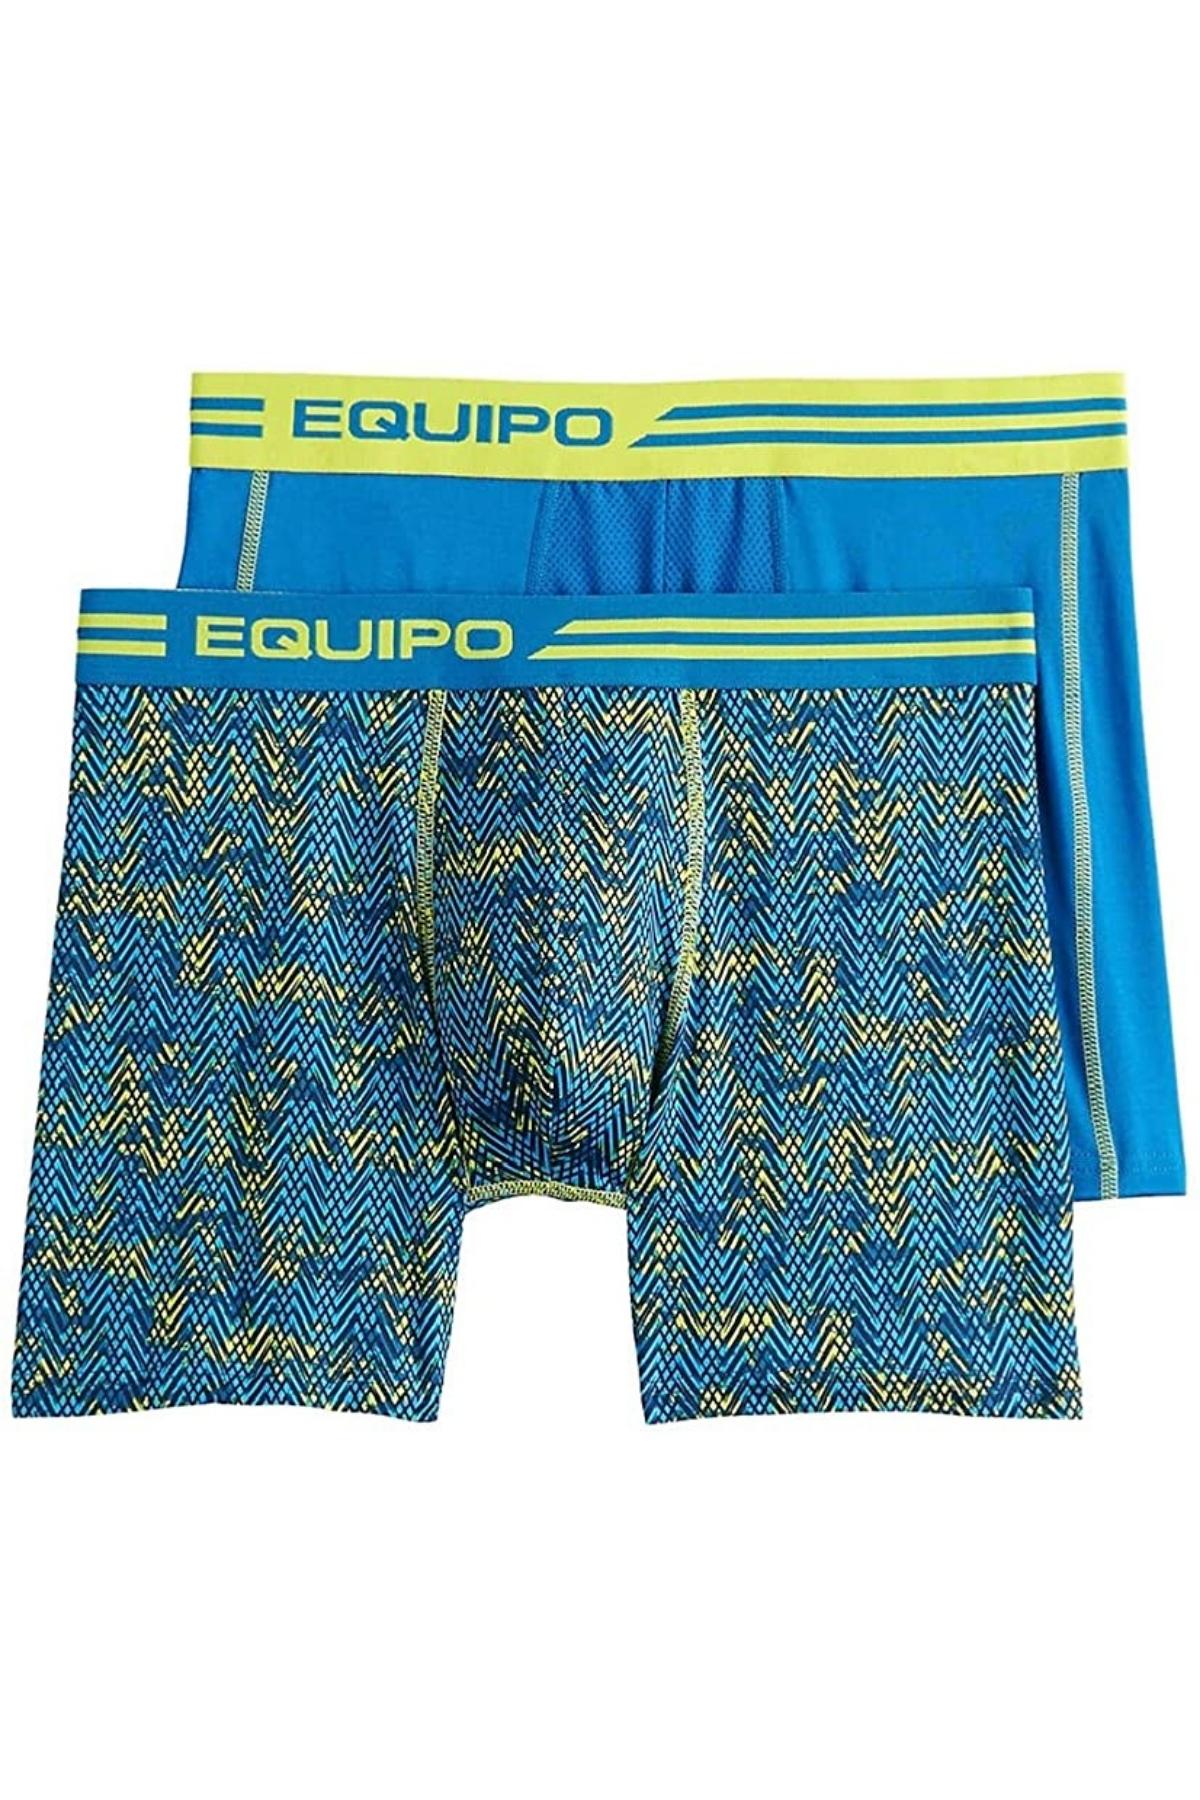 Equipo Teal and Lime Quick Dry Performace 2-Pack Boxer Briefs – CheapUndies